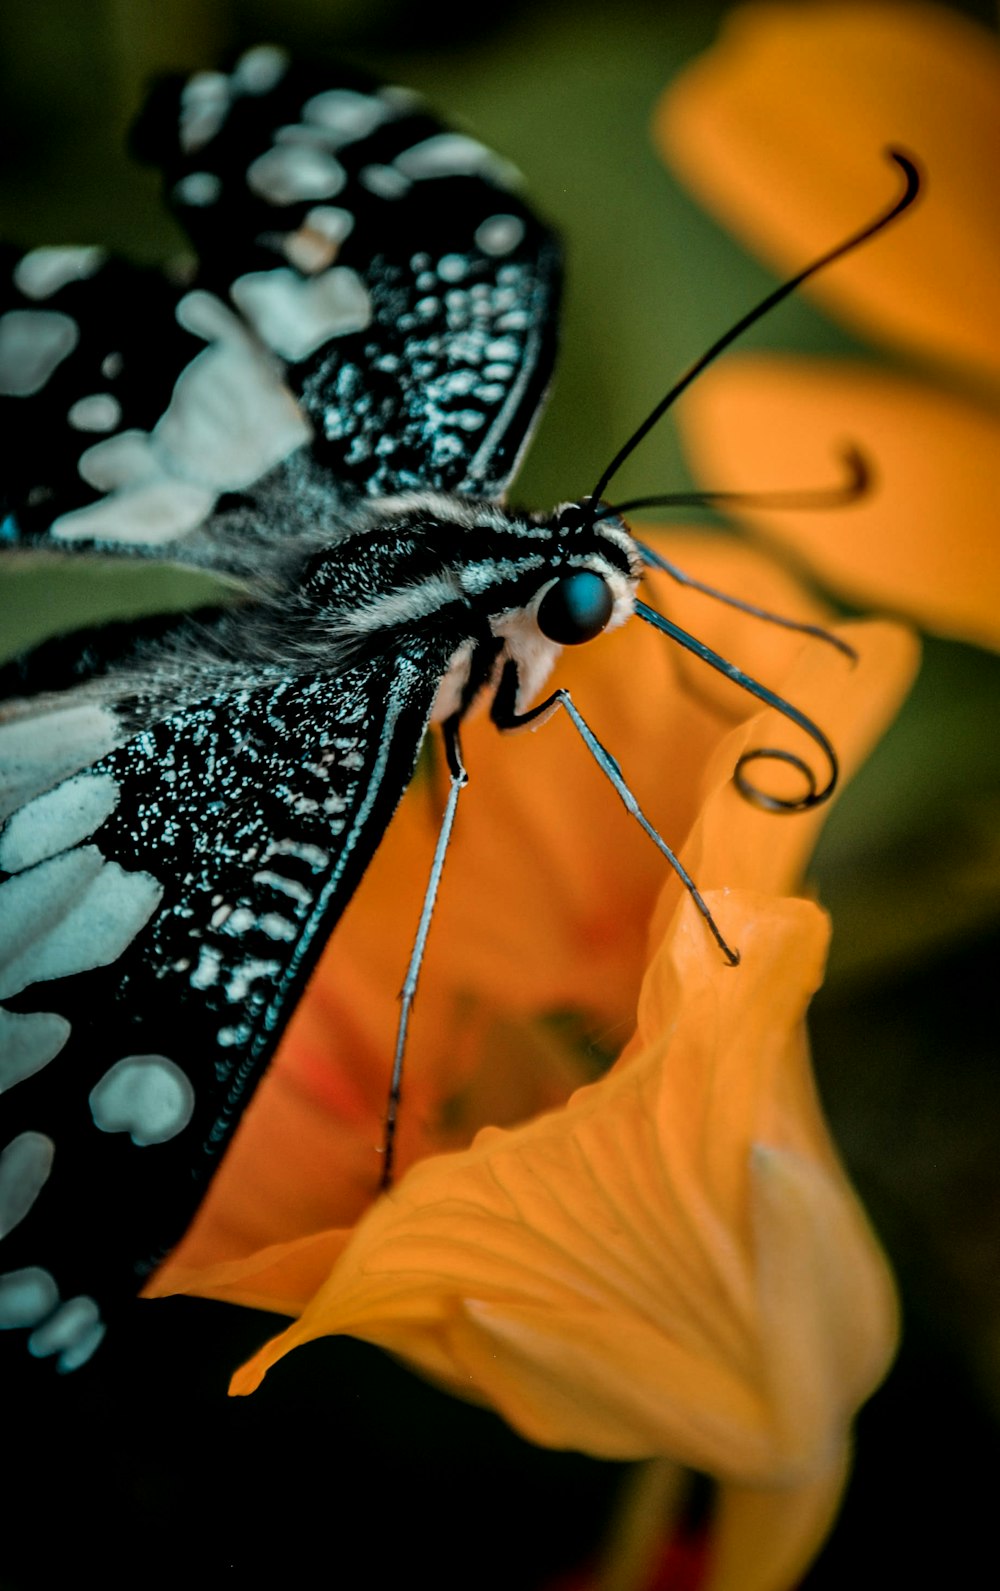 black and white butterfly on orange flower